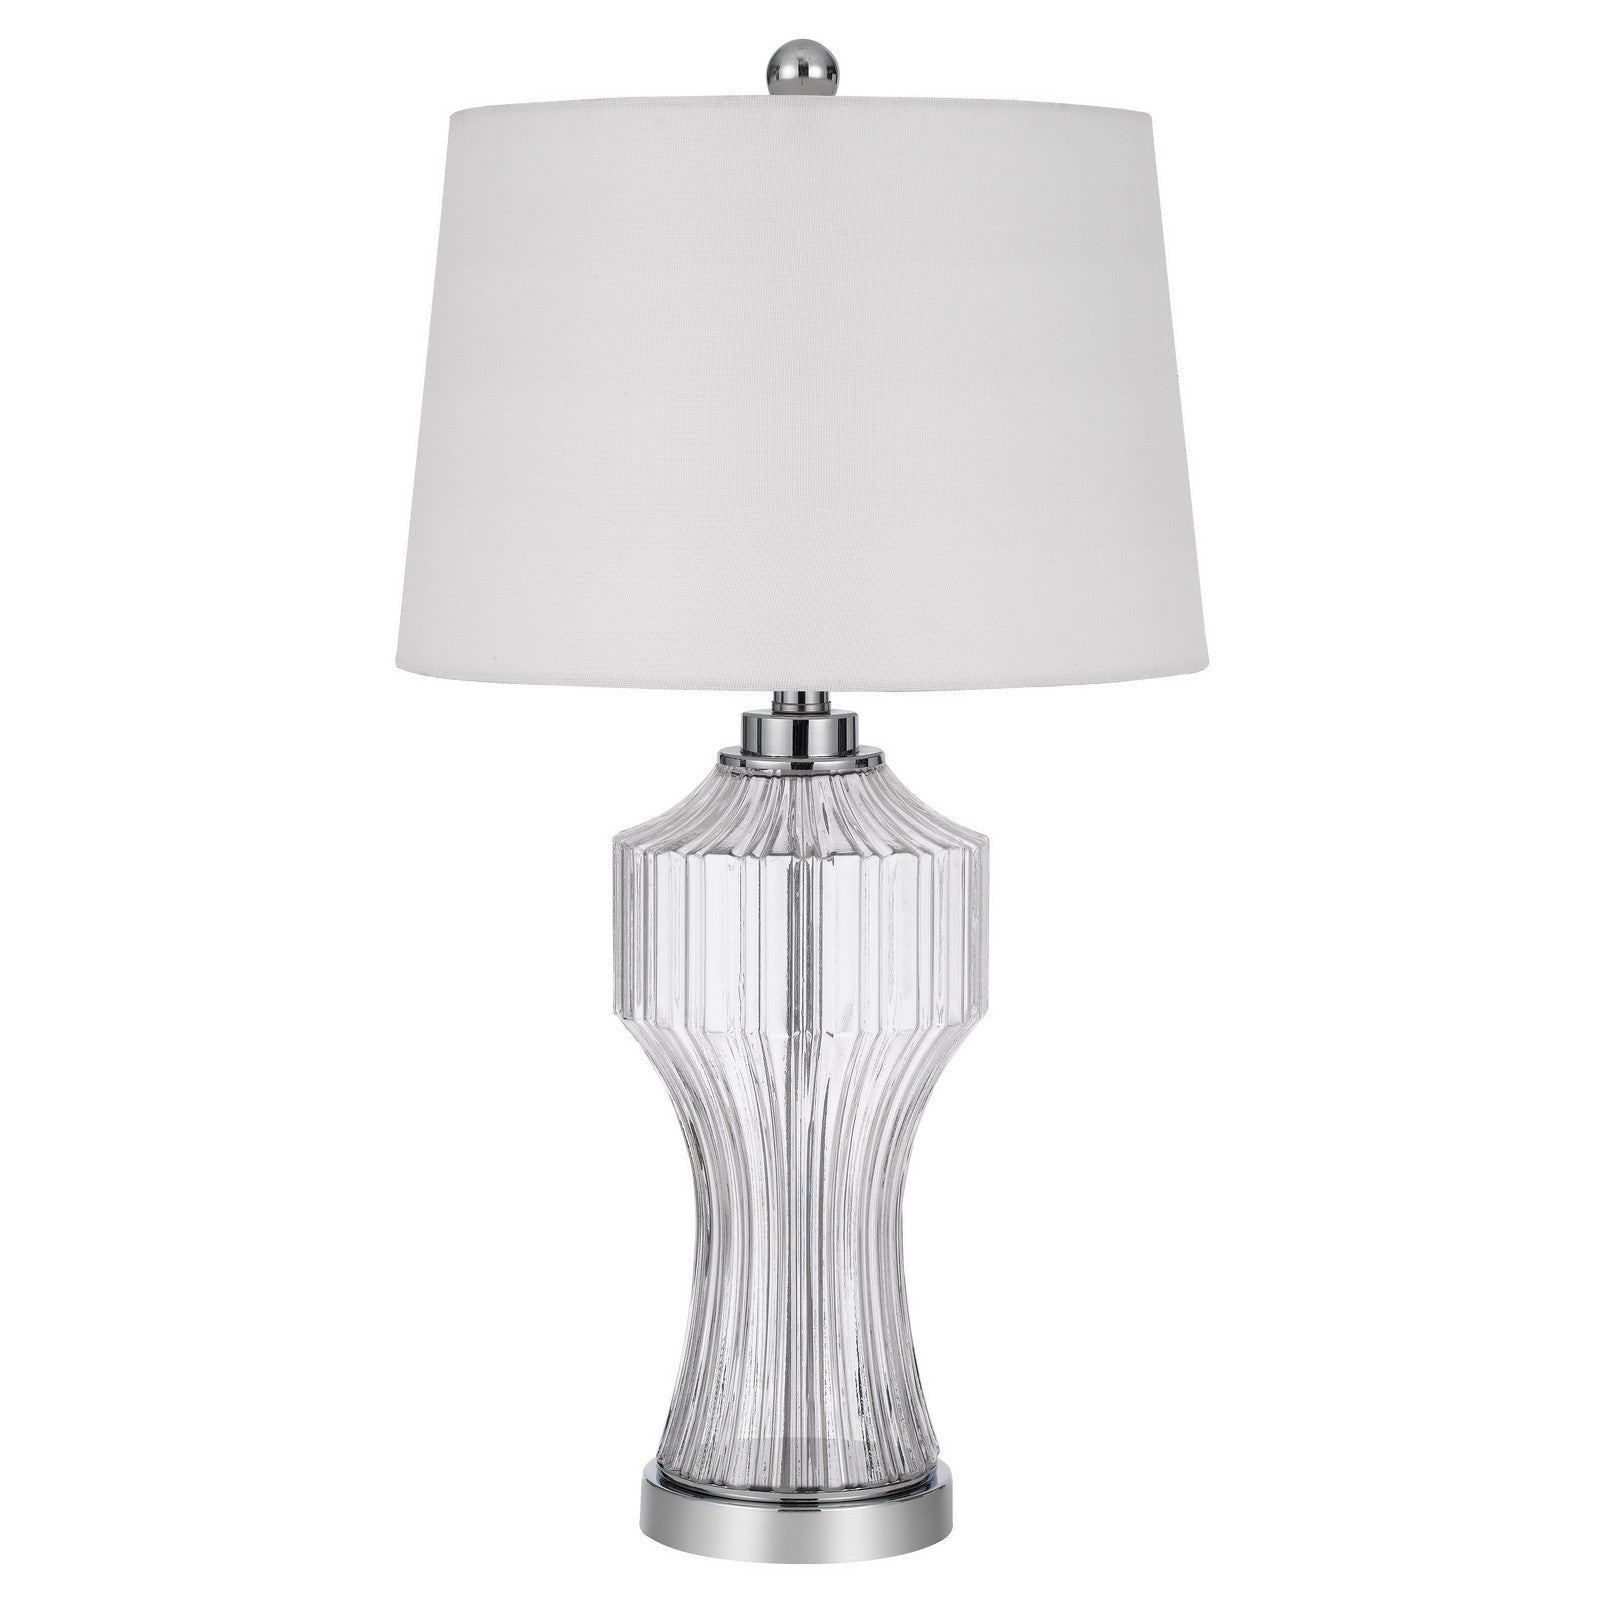 26" Clear Glass Table Lamp With White Empire Shade